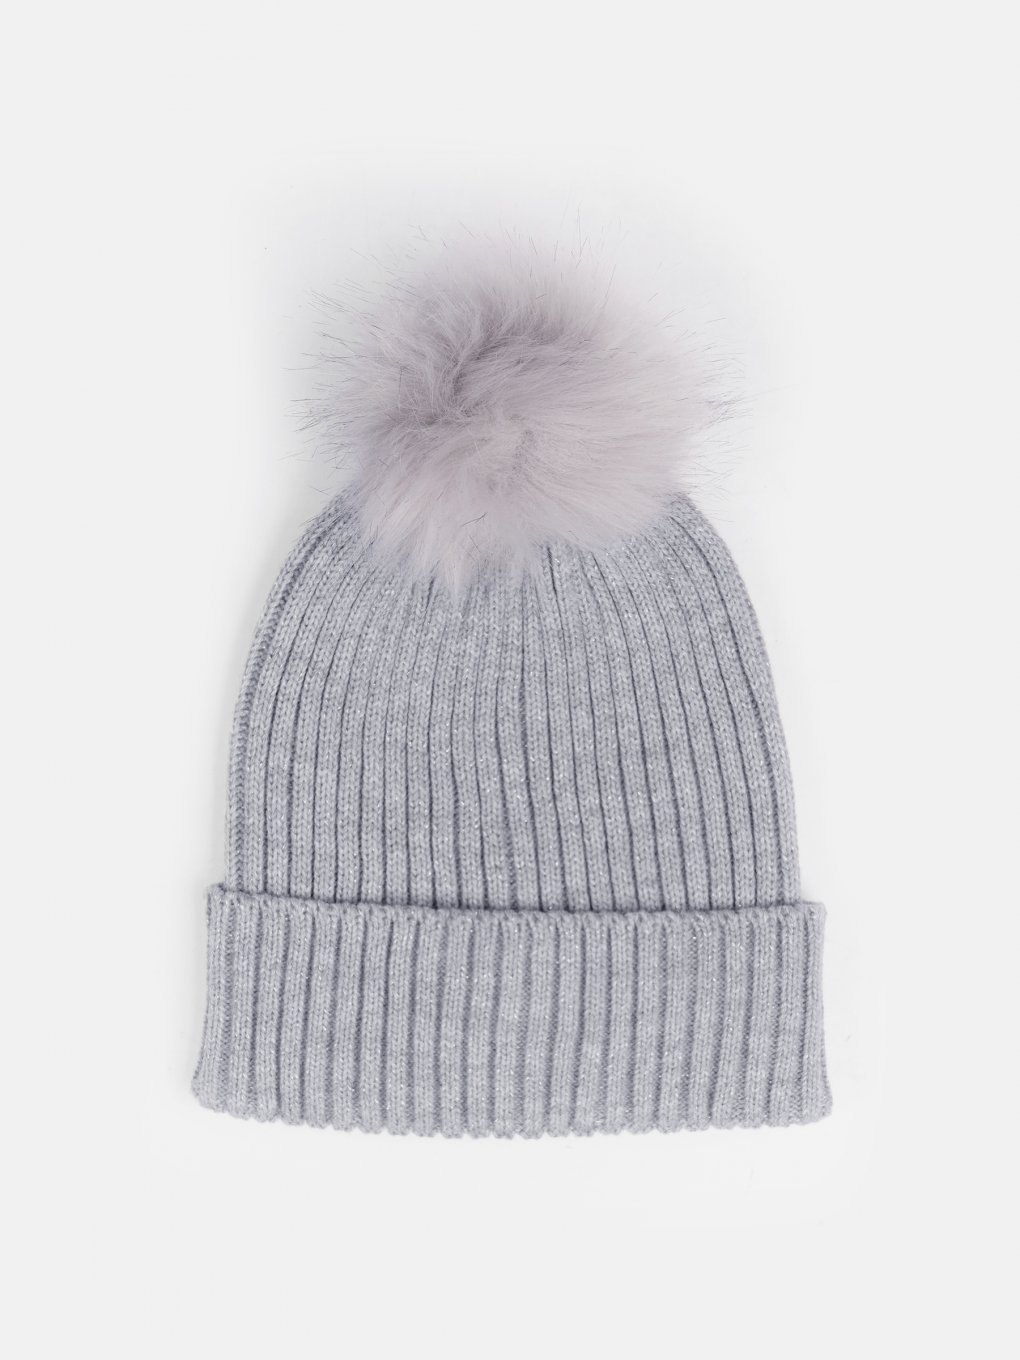 Knitted beanie with pom pom and metallic fibre